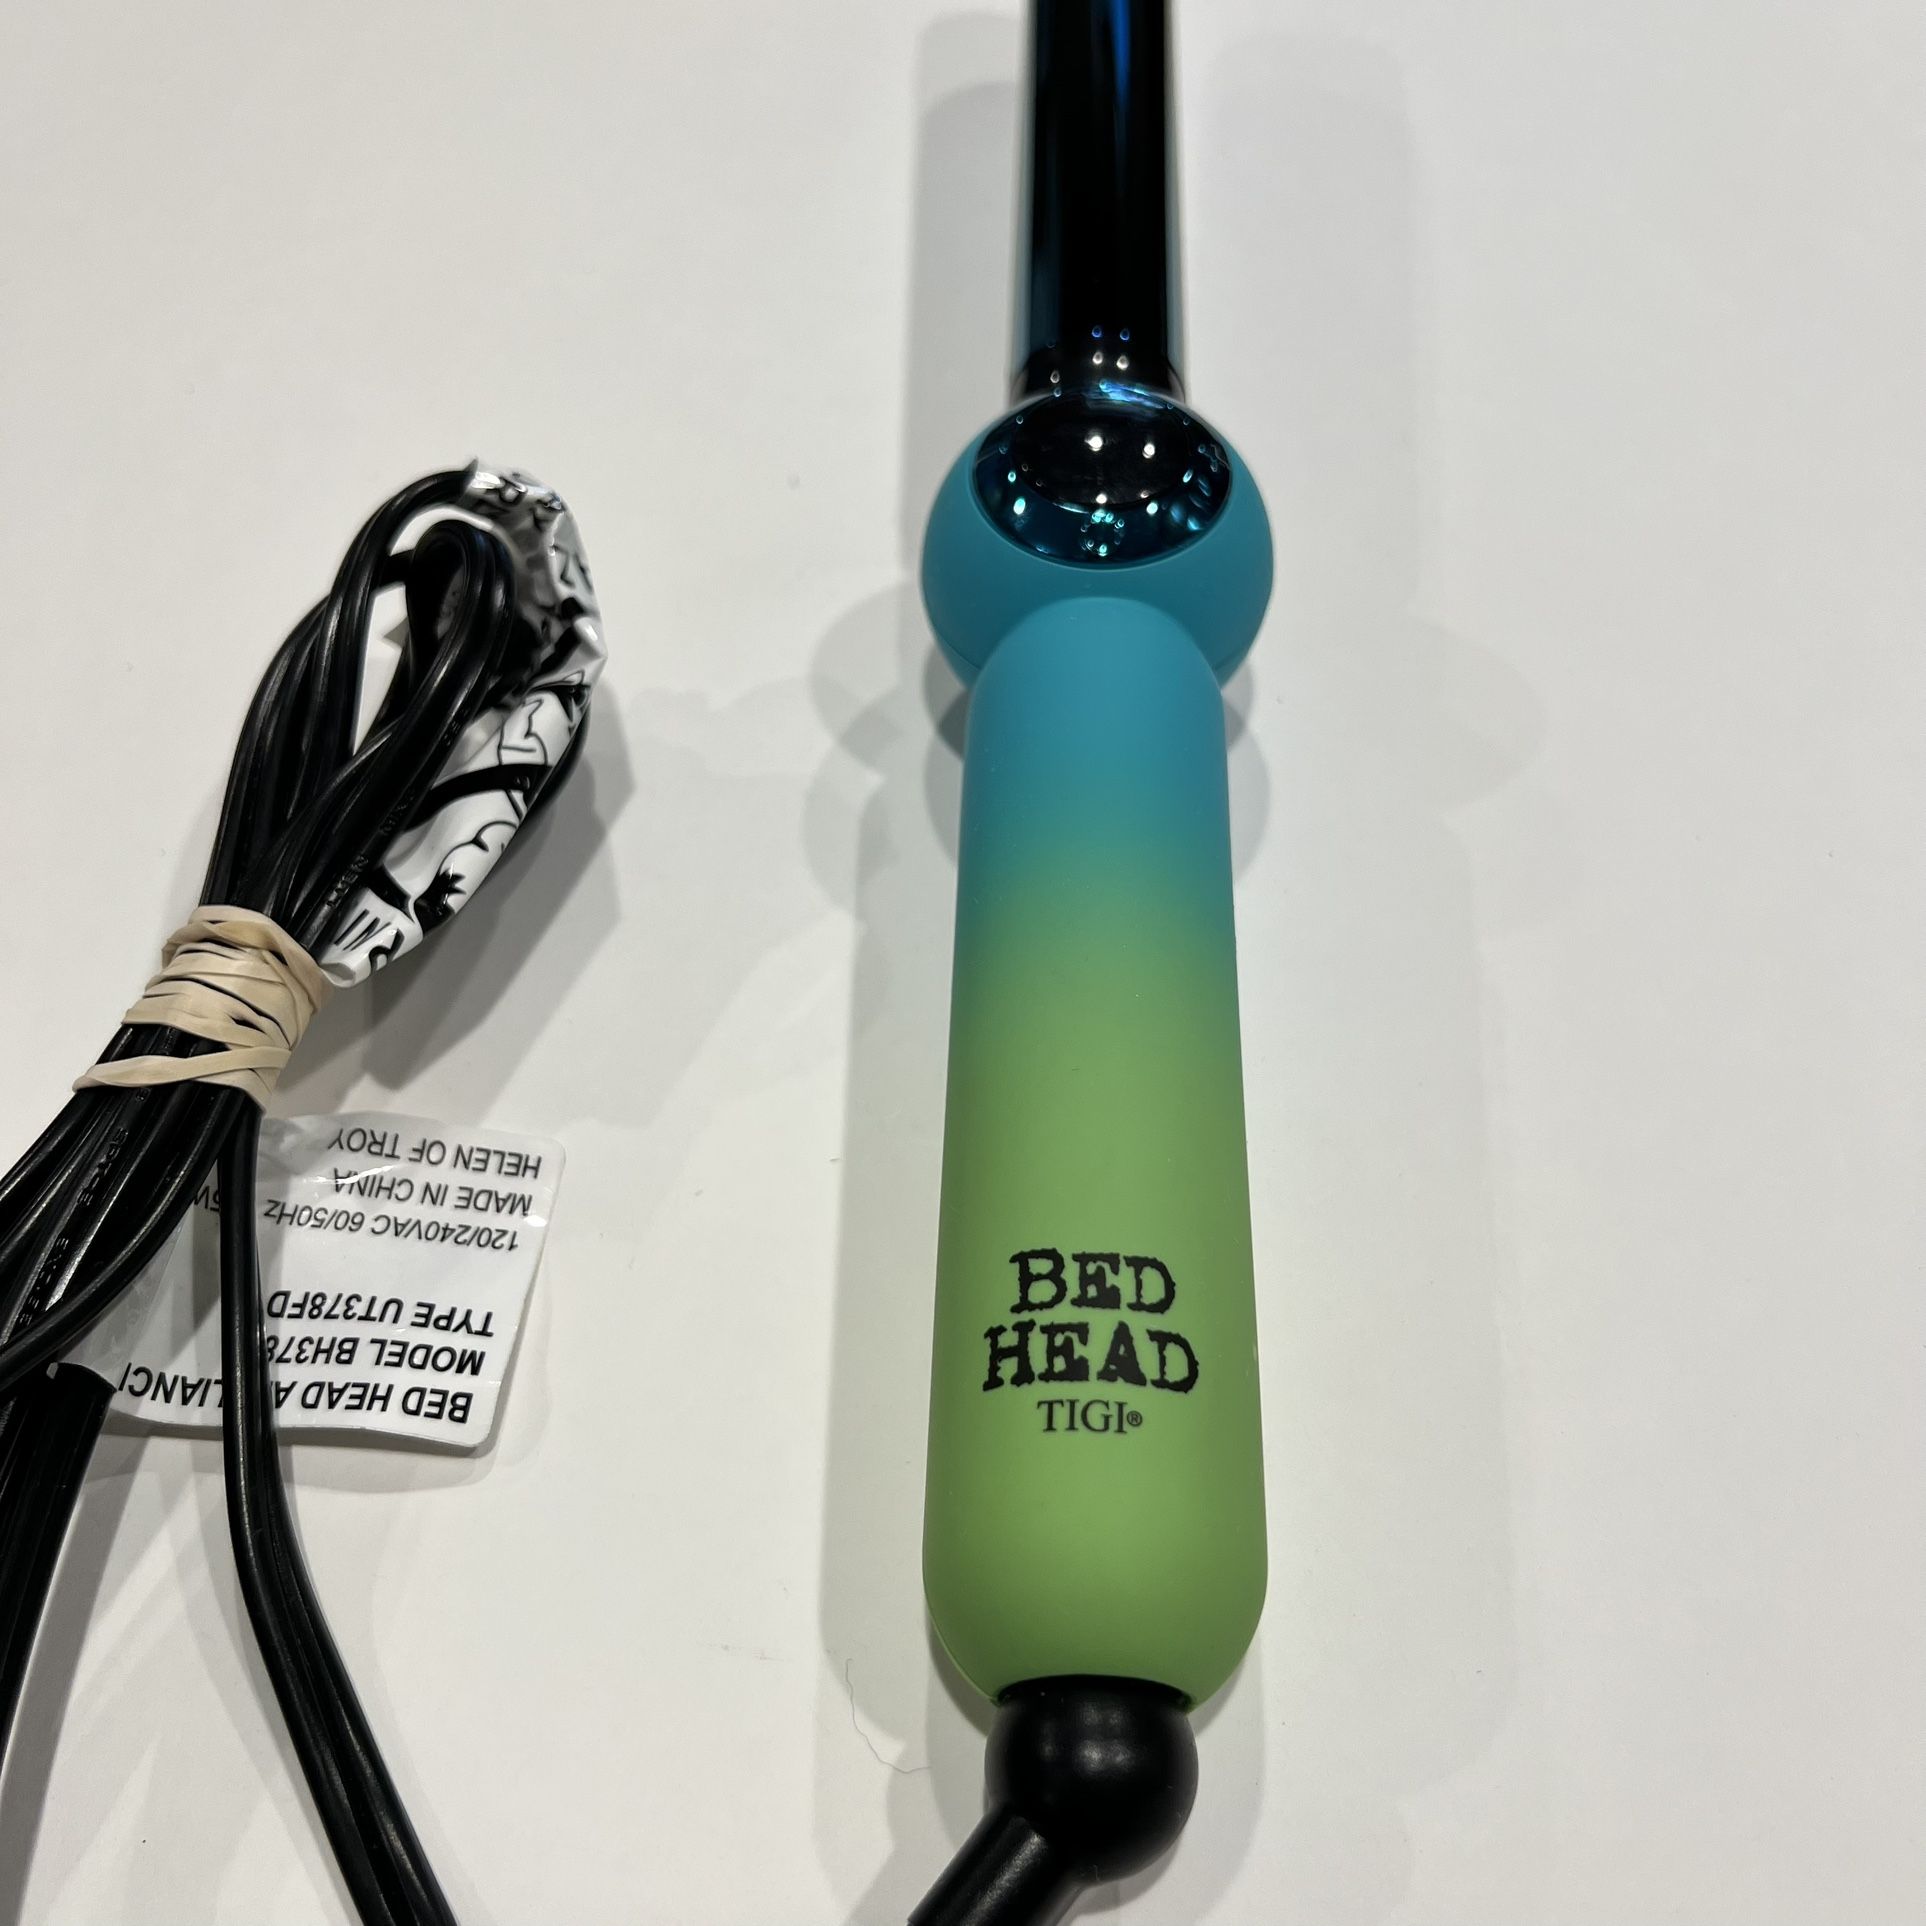 Bed Head curling iron/ Wand- Gently Used